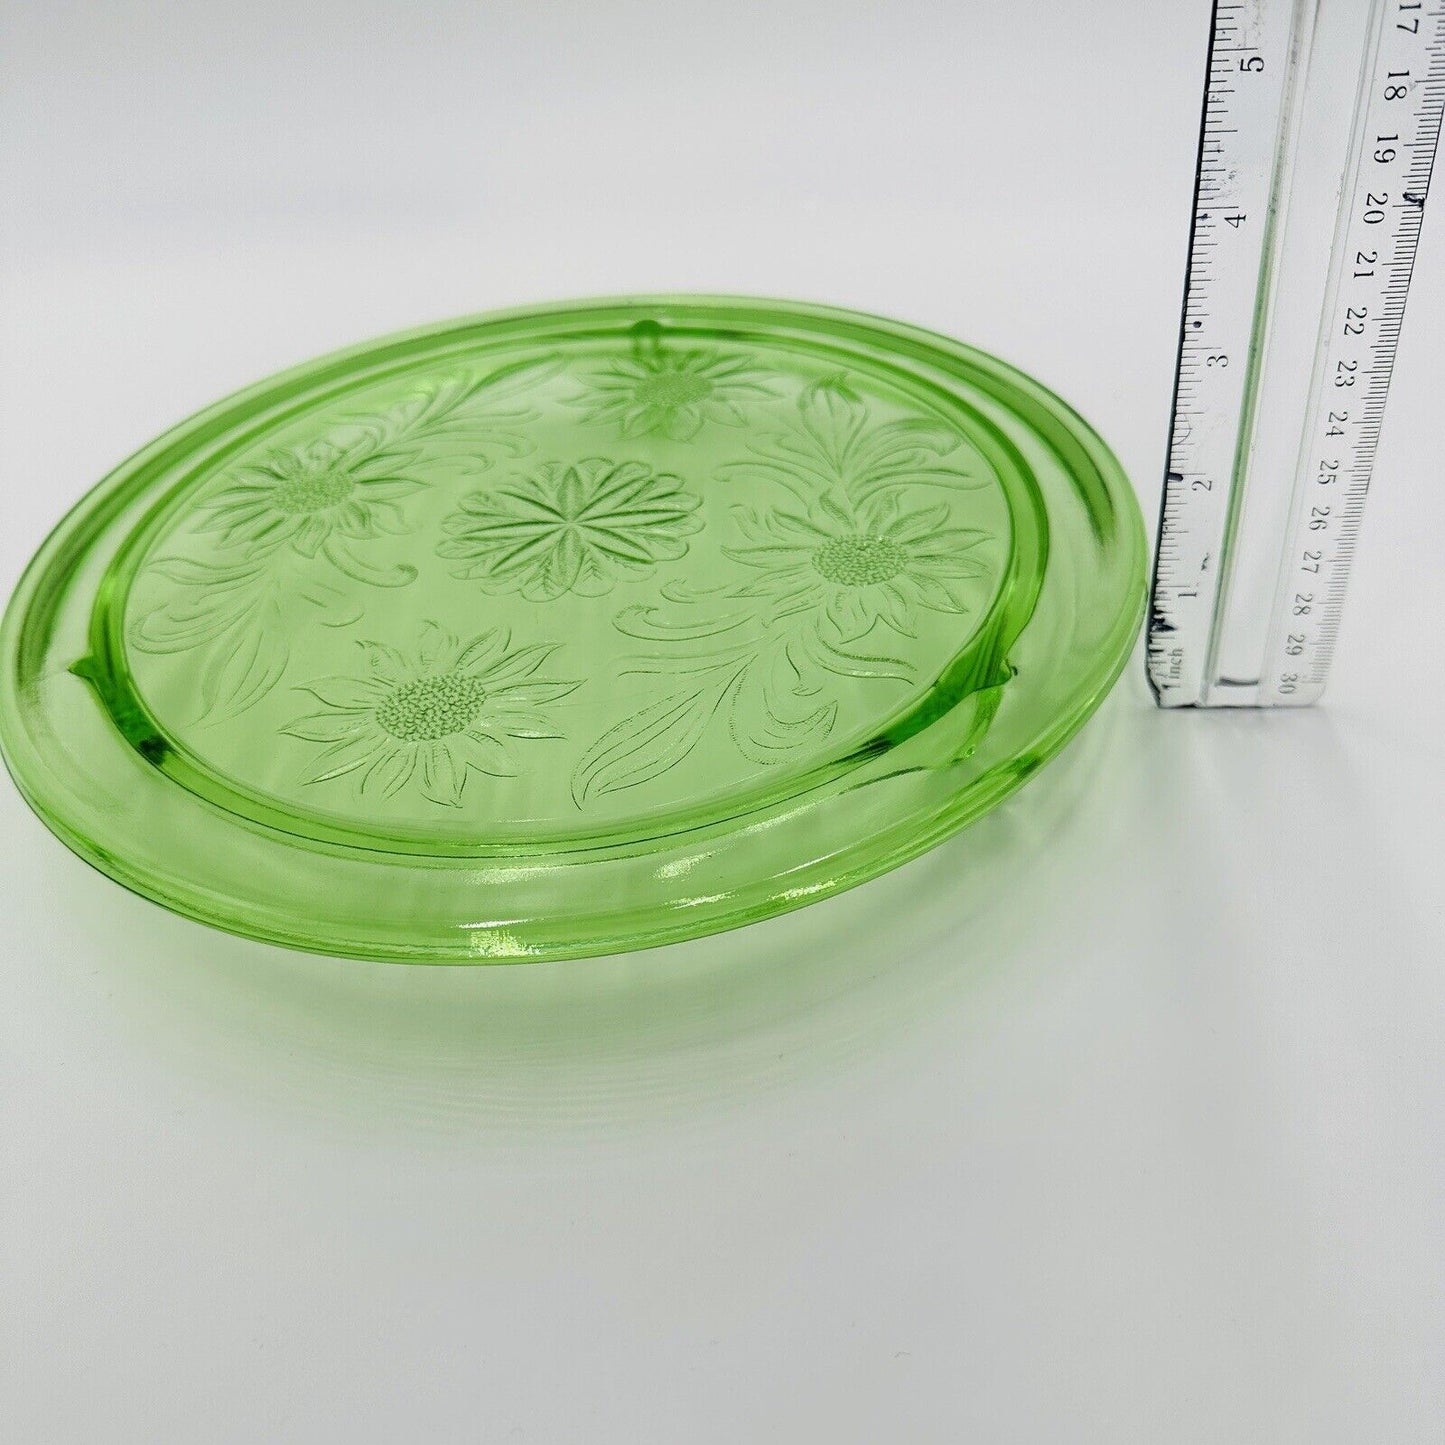 Jeannette Sunflower Depression Glass Uranium Footed Cake Plate 10 Tray Vintage